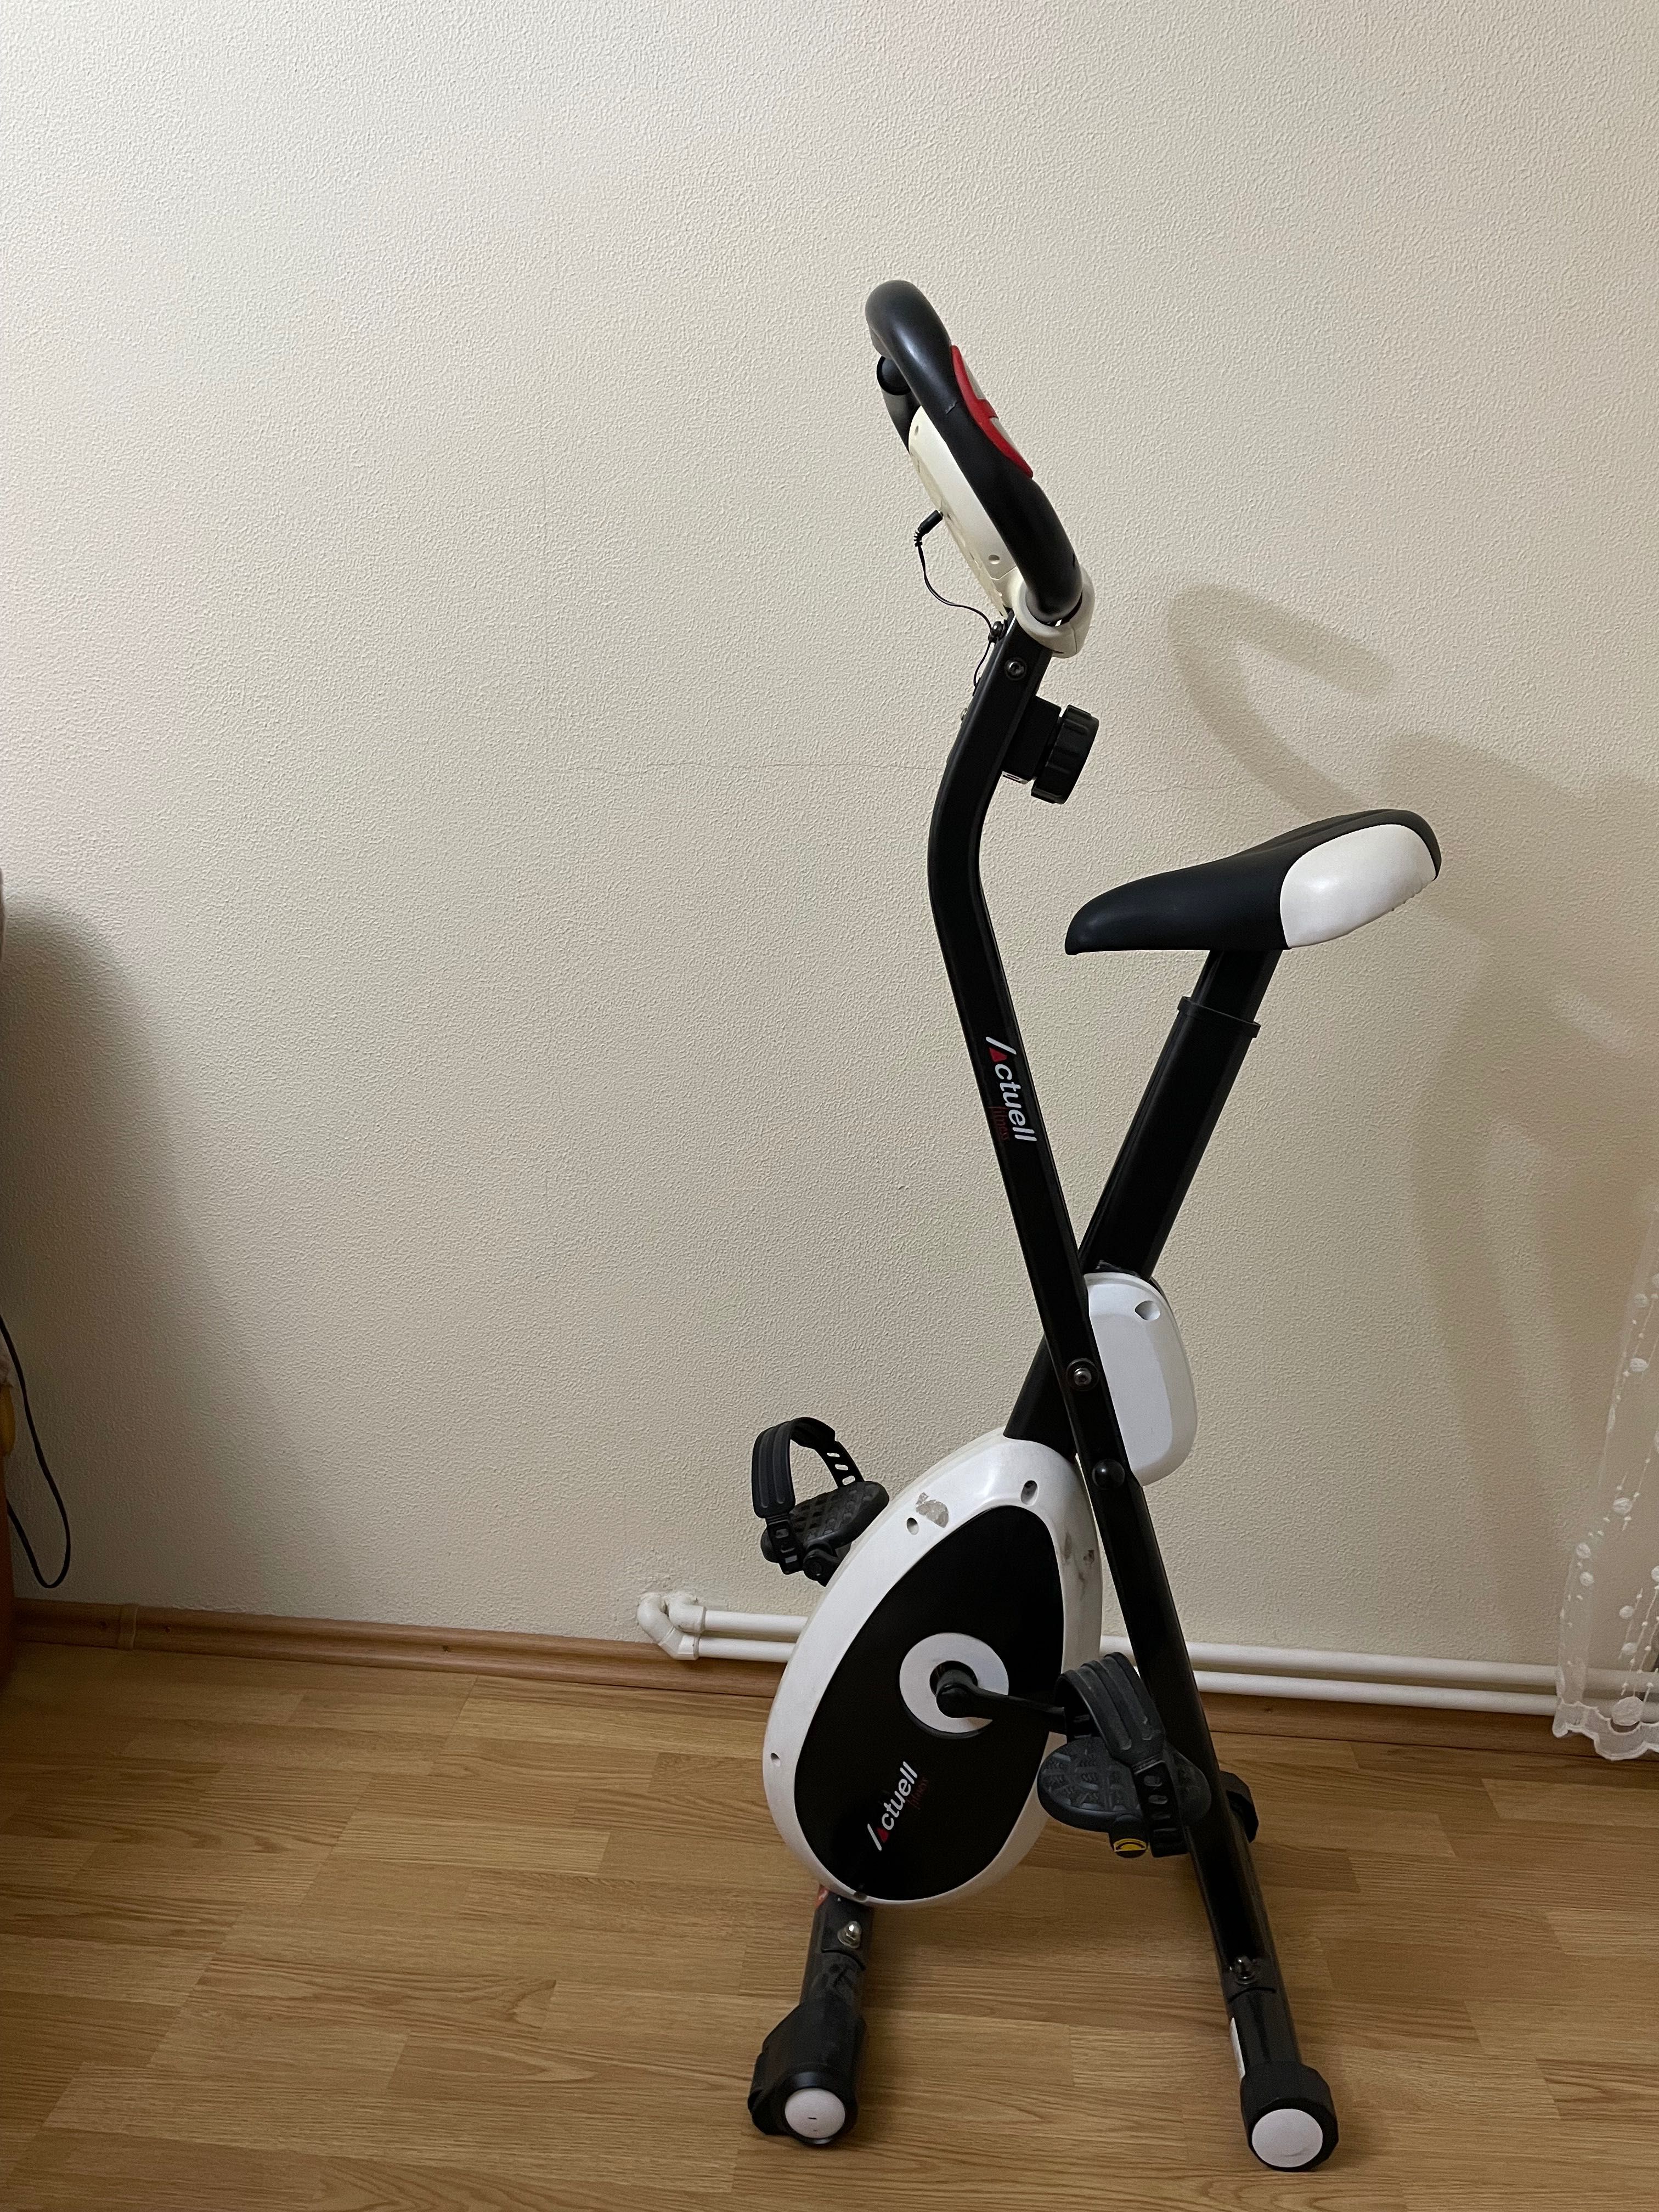 Bicicletă fitness model Actuell fitness